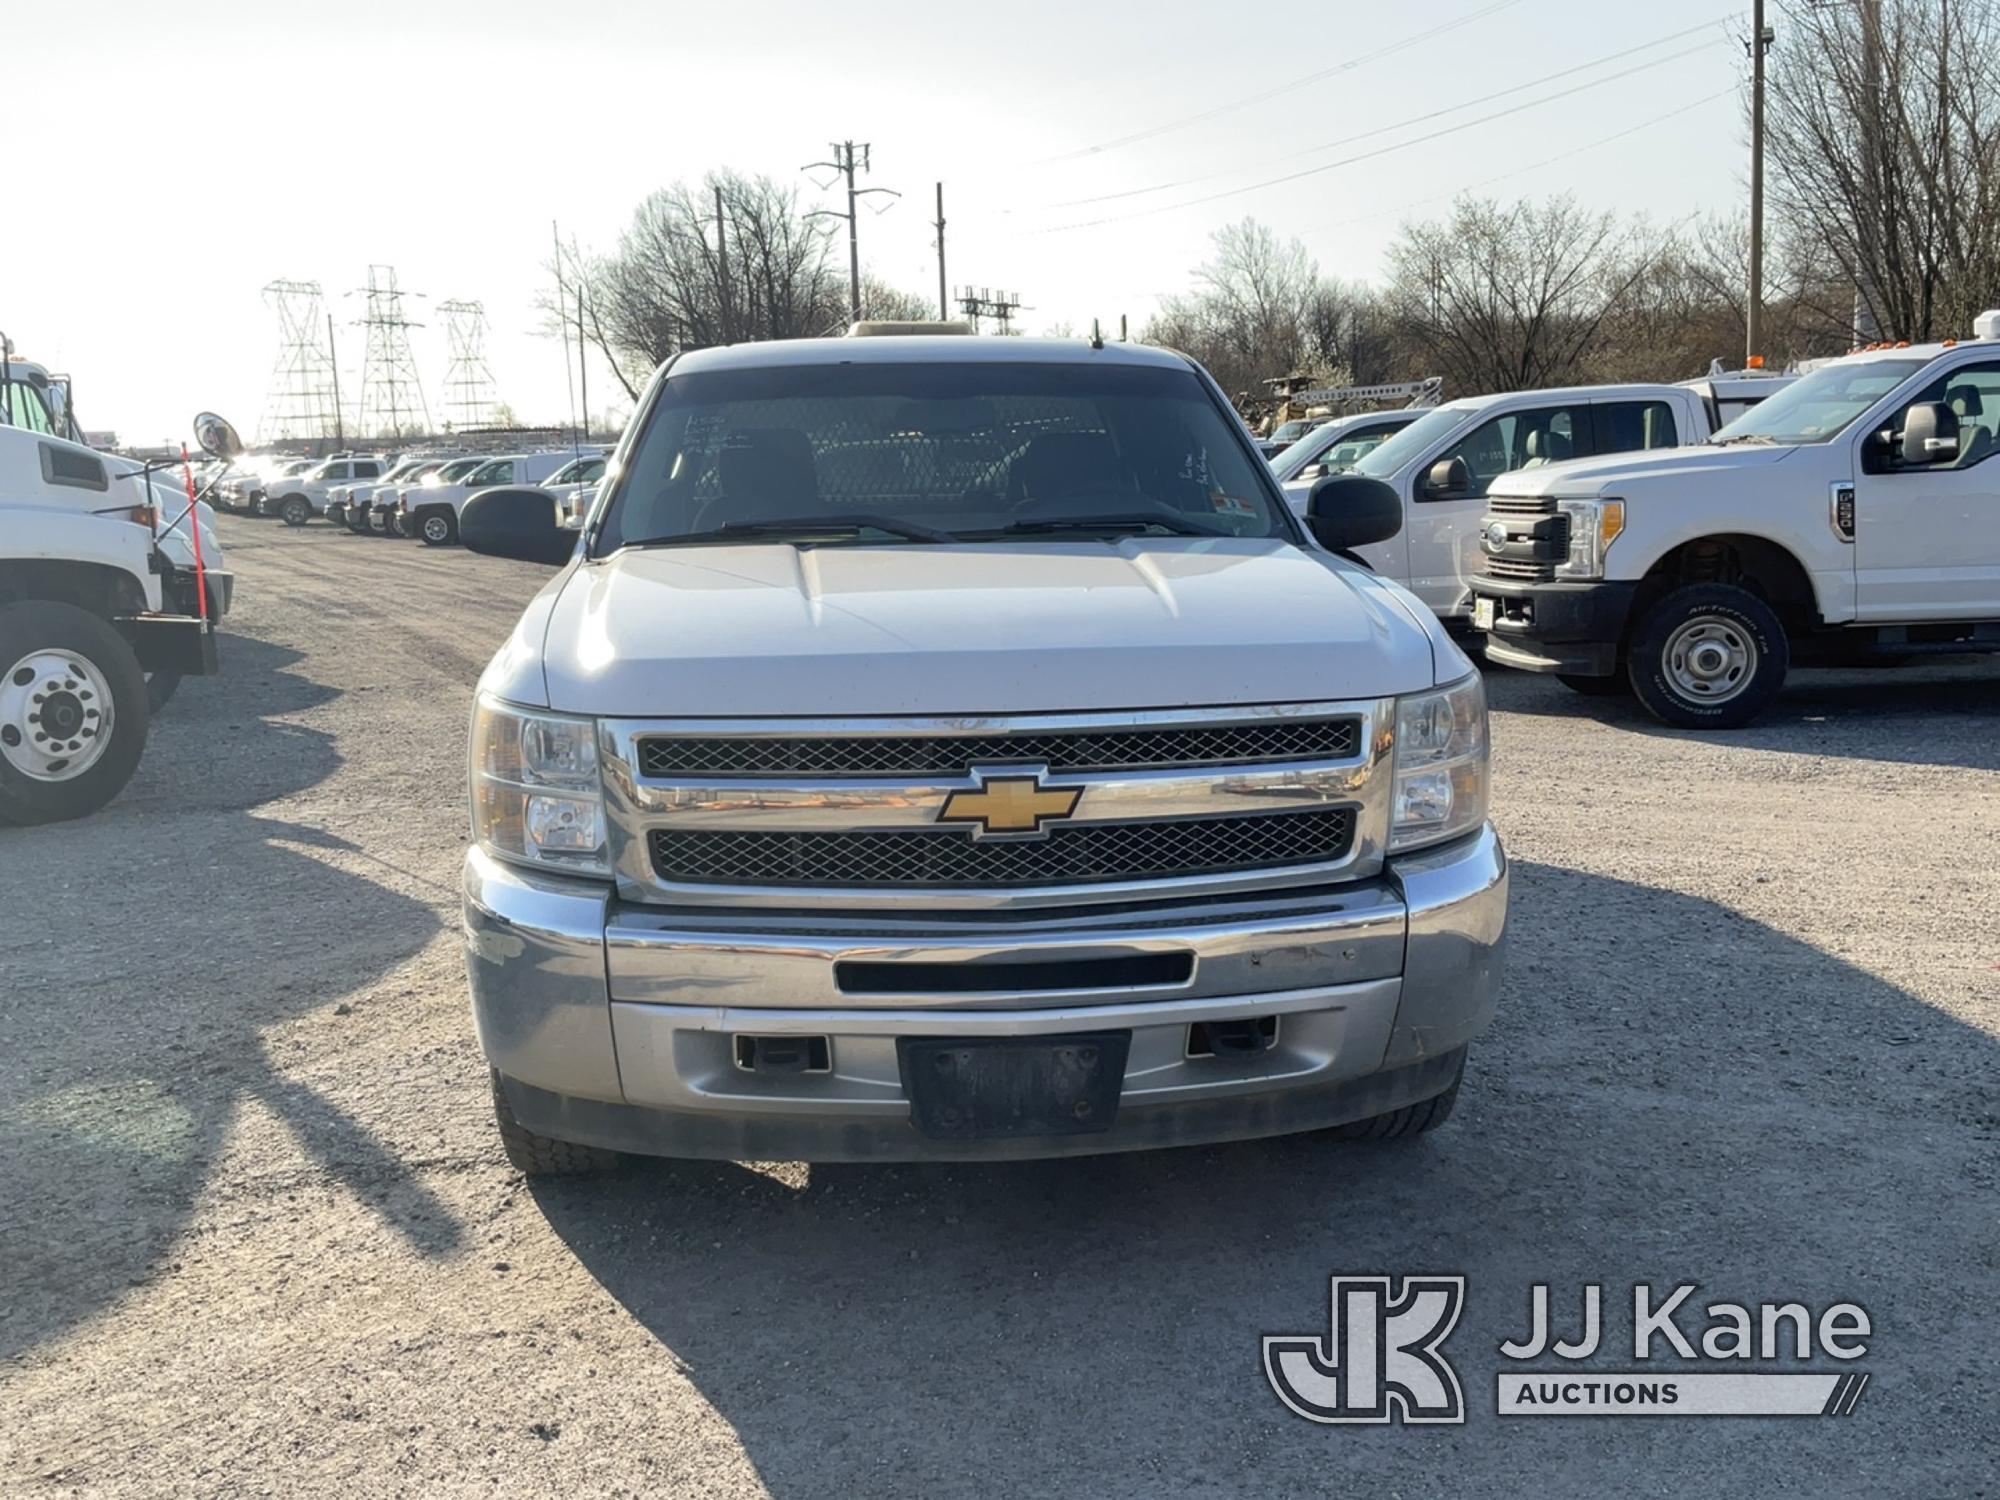 (Plymouth Meeting, PA) 2013 Chevrolet Silverado 1500 4x4 Extended-Cab Pickup Truck Runs & Moves, Bod